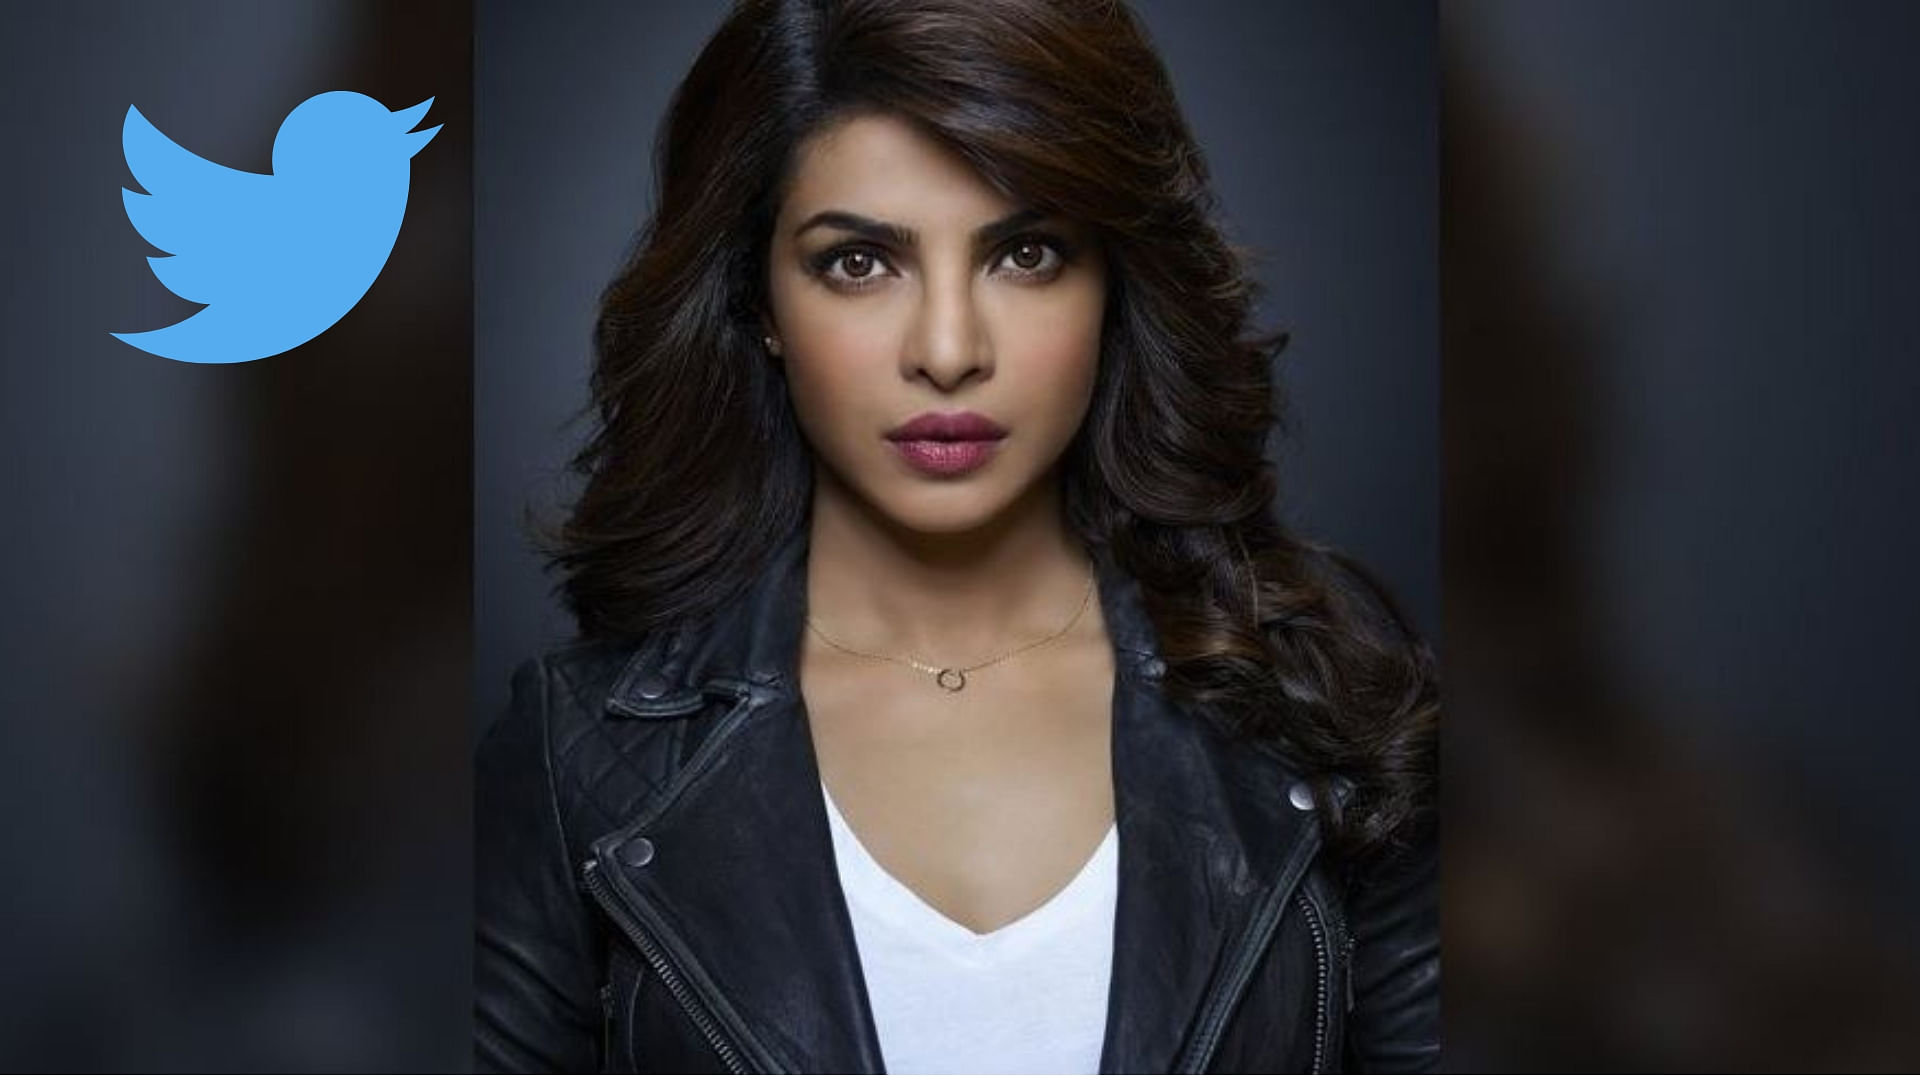 Twitter divided after a Pakistani woman accused actor Priyanka Chopra of encouraging nuclear war between India and Pakistan.